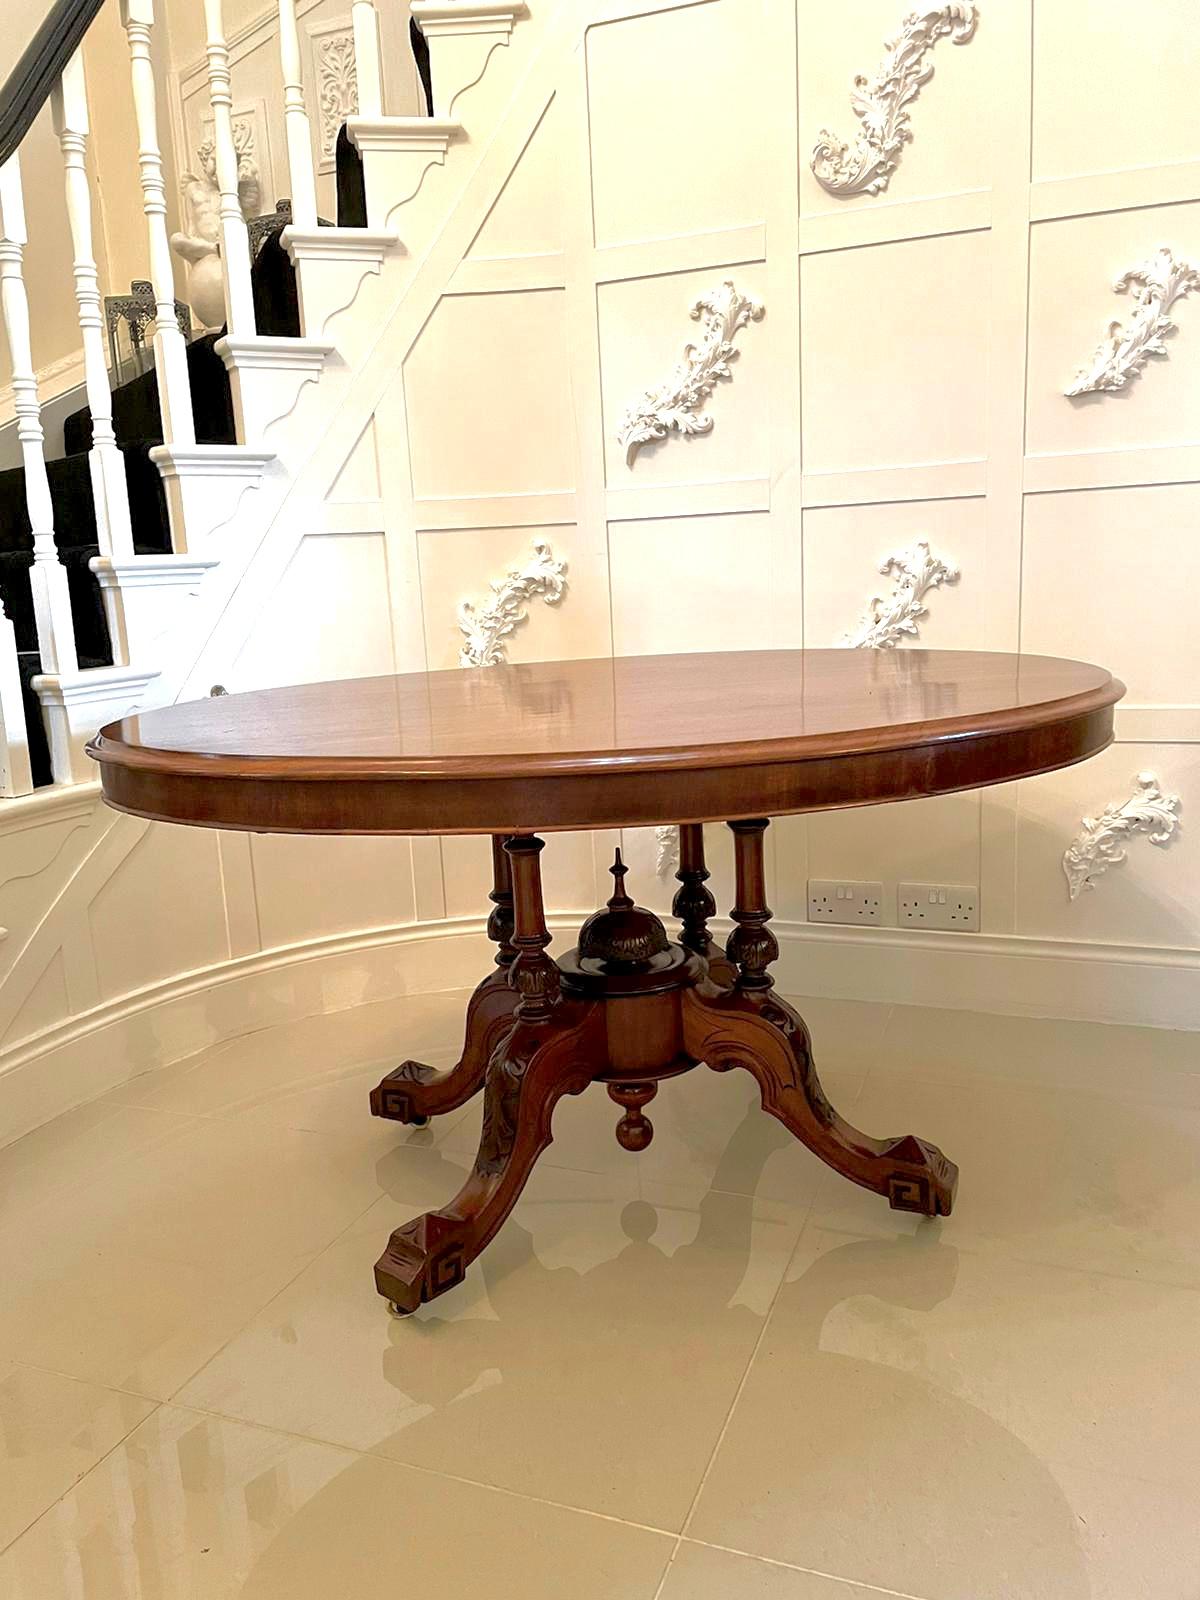 Antique 19th century Victorian oval mahogany centre table having an attractive quality mahogany tilting top with a thumb moulded edge, oval mahogany frieze supported by four glorious turned columns standing on four beautifully shaped and carved